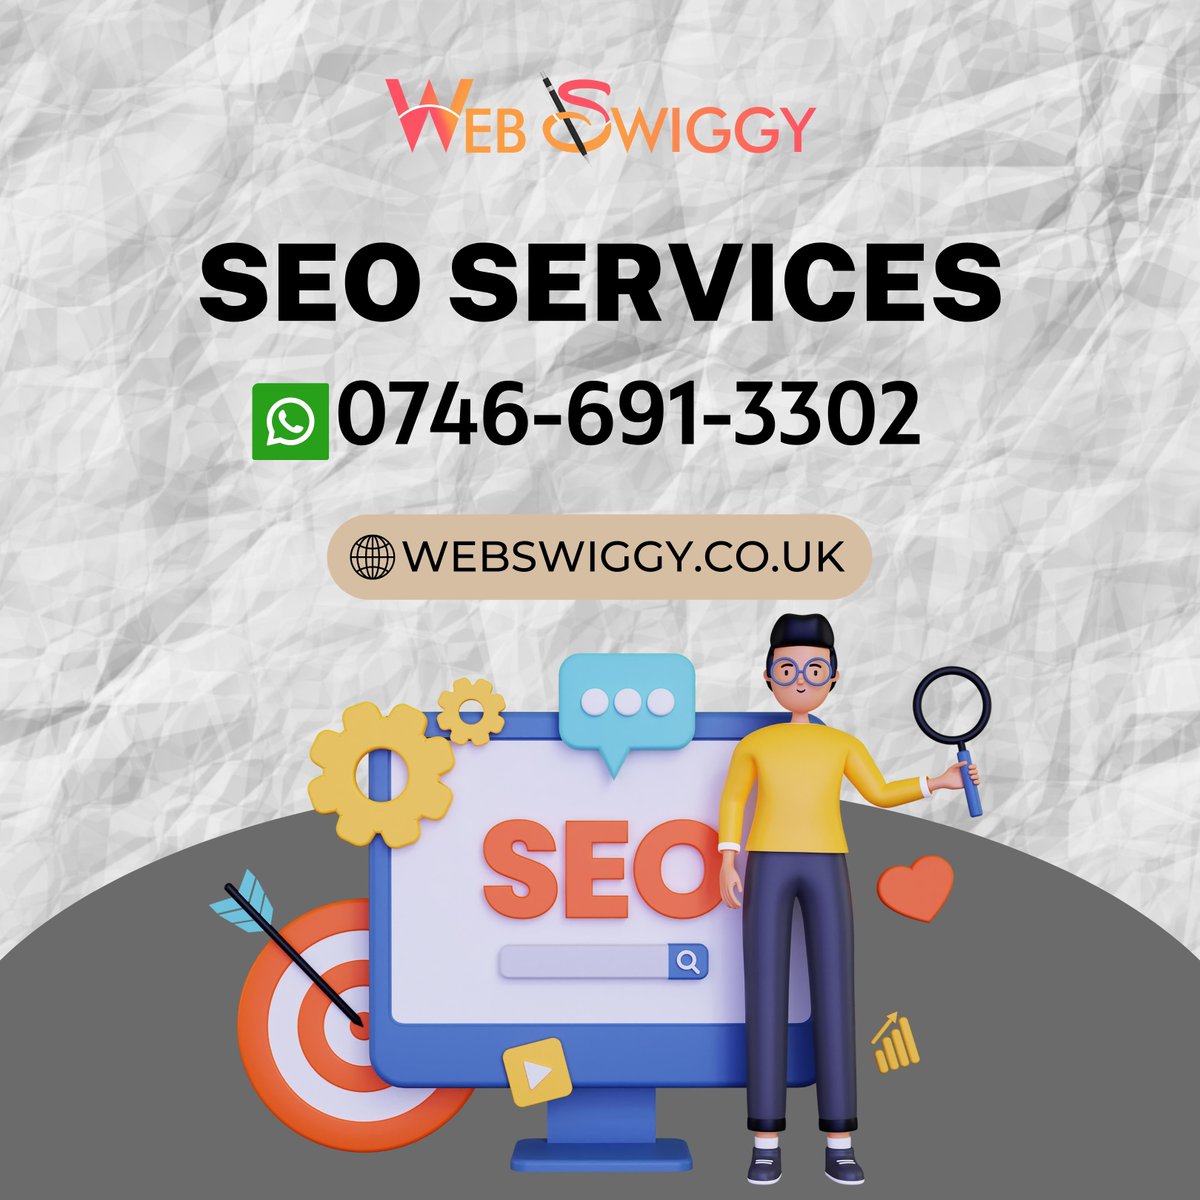 SEO helps small business owners create fast, robust, and user-friendly websites  Get SEO For Your Business Today: webswiggy.co.uk #WebSwiggy #SEO #SEOServices #SmallBusiness #SmallBusinessuk #Business #BusinessOwner #Businesstips #SEOLondon #London #DigitalMarketing